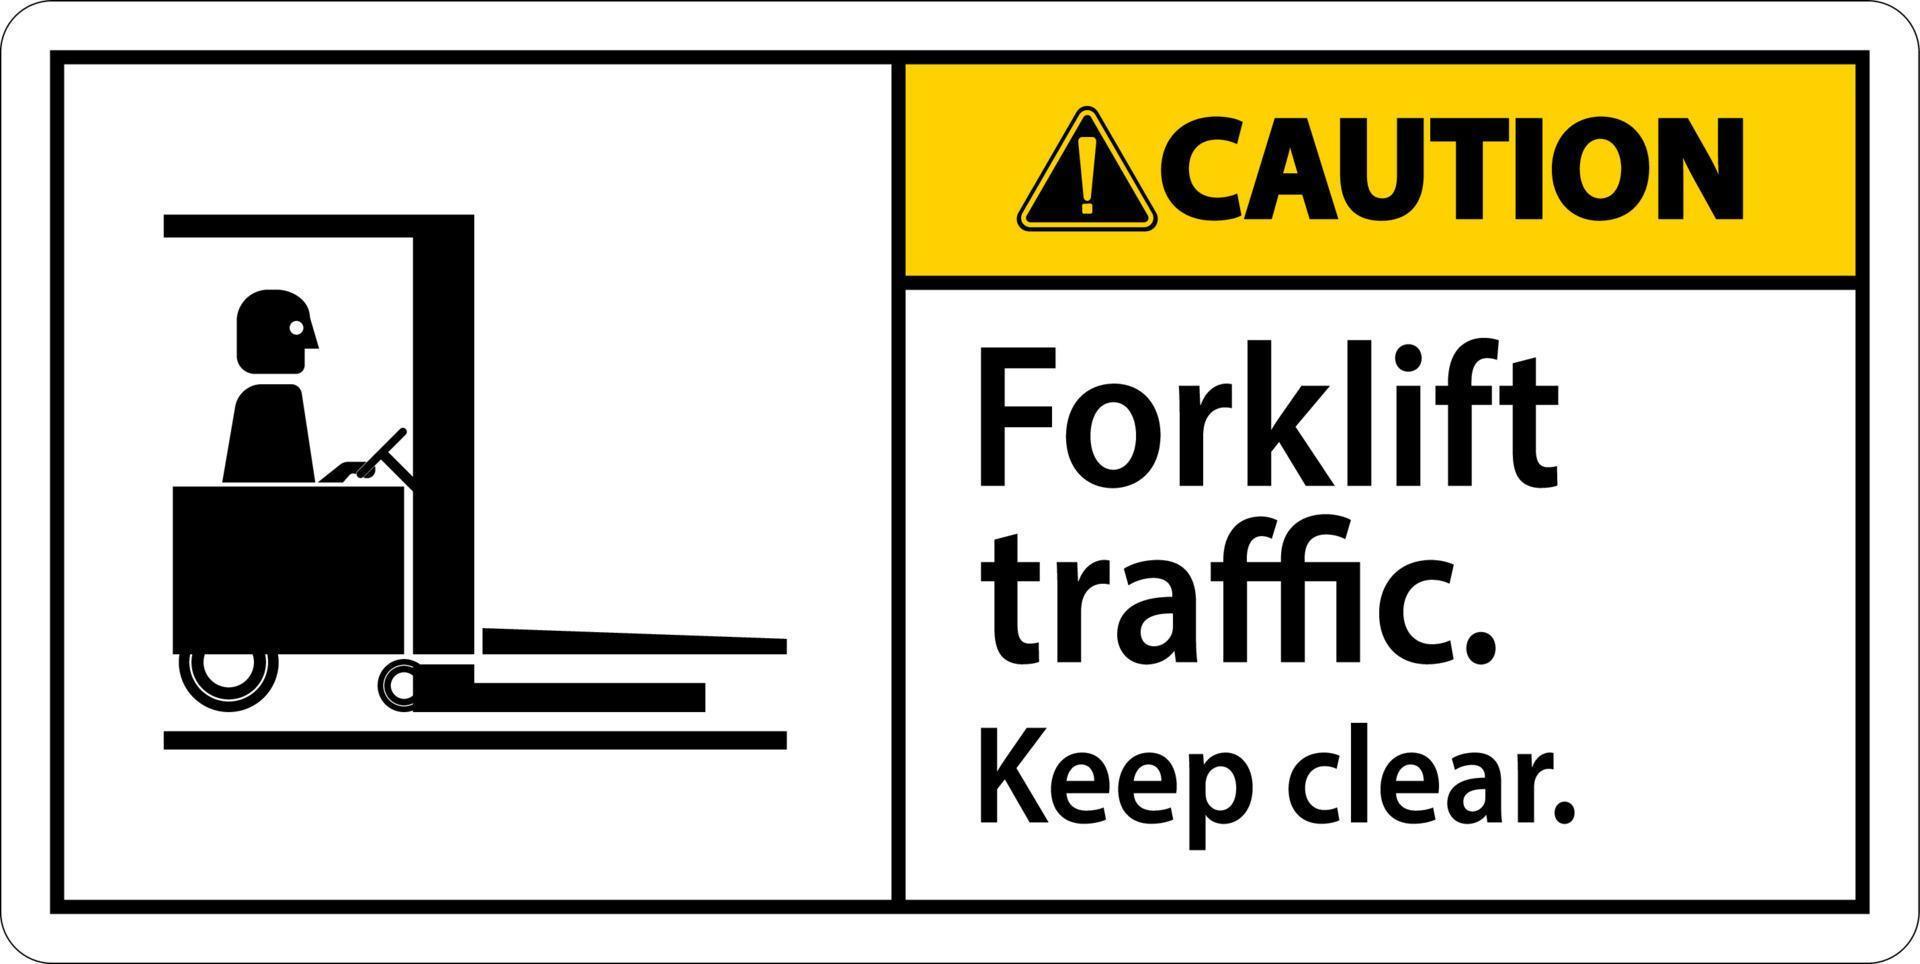 Caution Forklift Traffic Keep Clear Sign vector